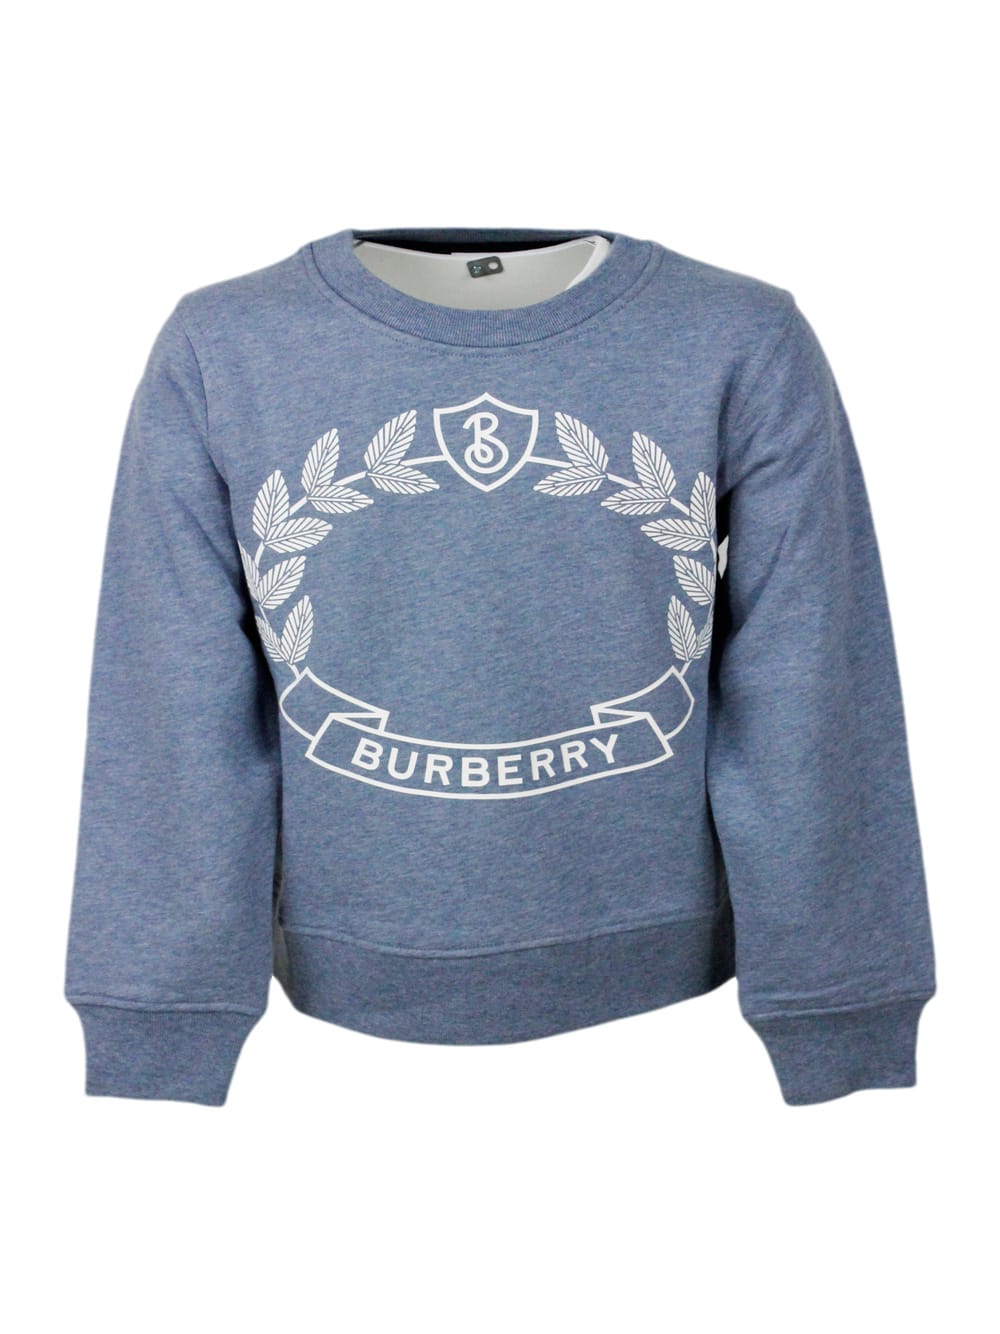 Shop Burberry Crewneck Sweatshirt In Cotton Jersey With White Logo Print On The Front In Light Blu